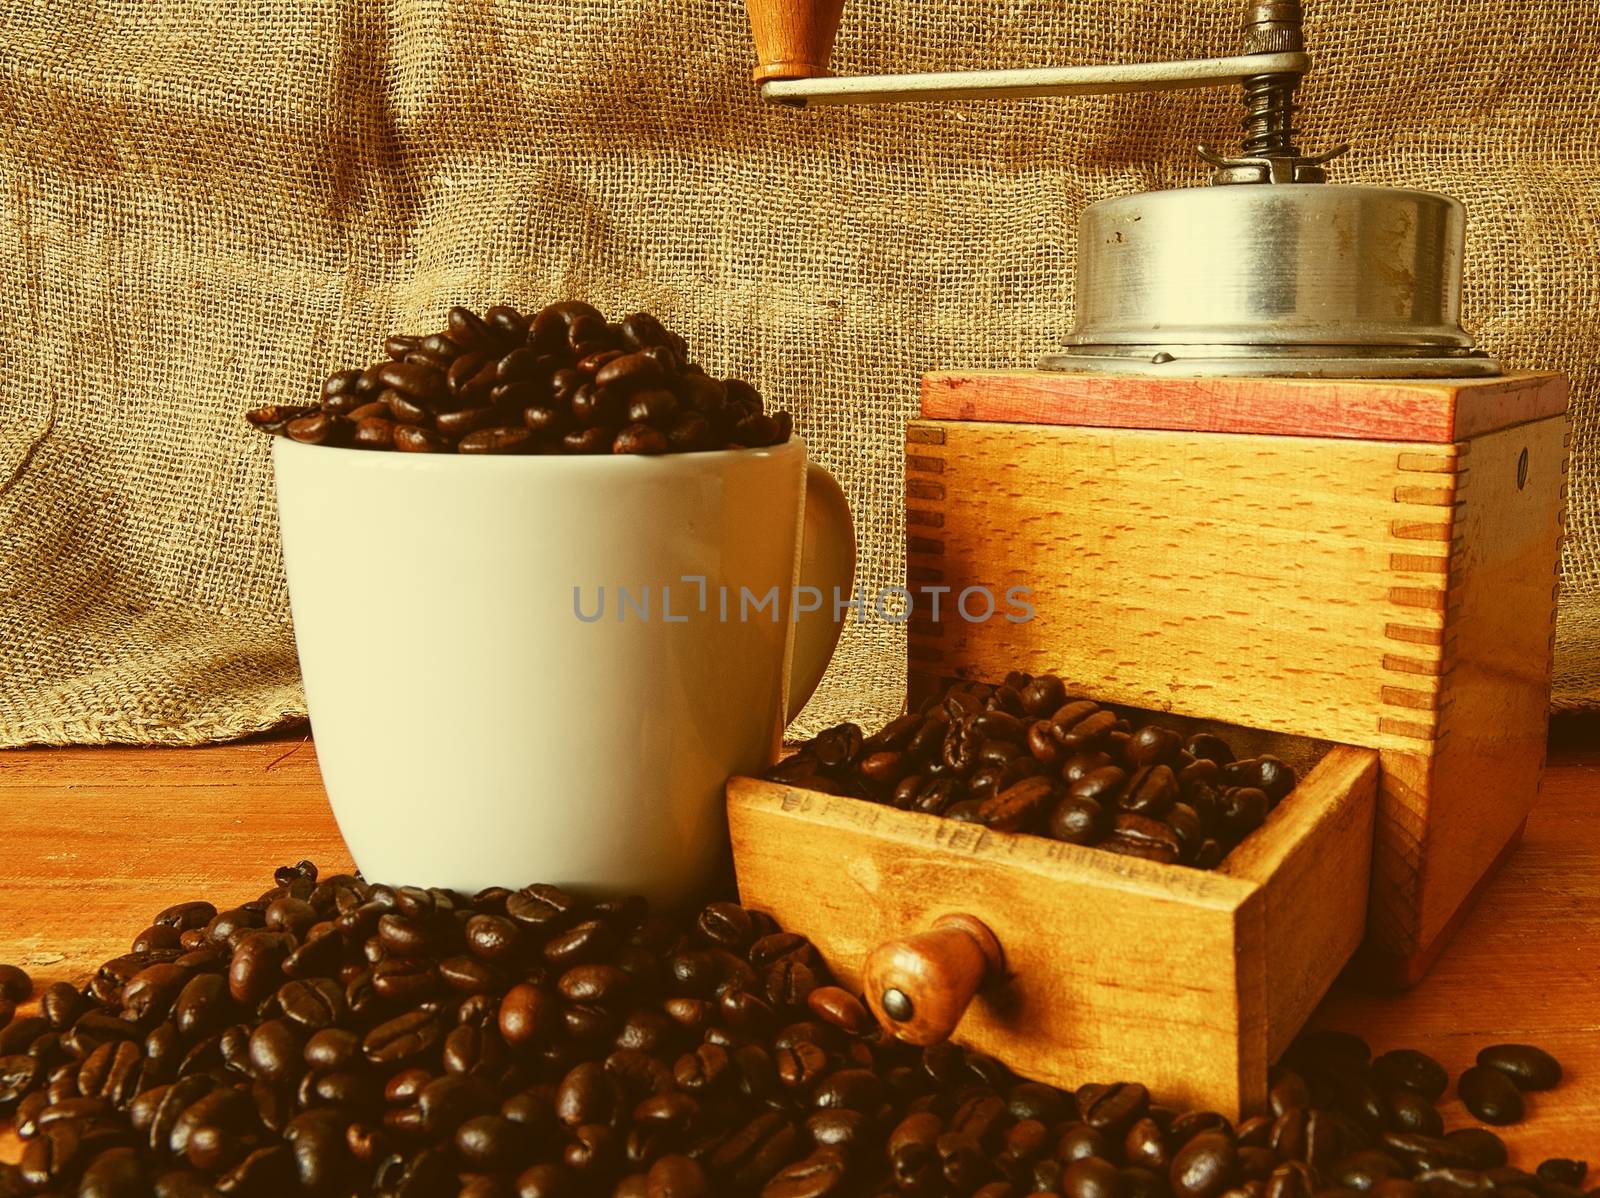 Vintage coffee mill, coffee beans and white cup filled coffee beans on wooden background by roman_nerud